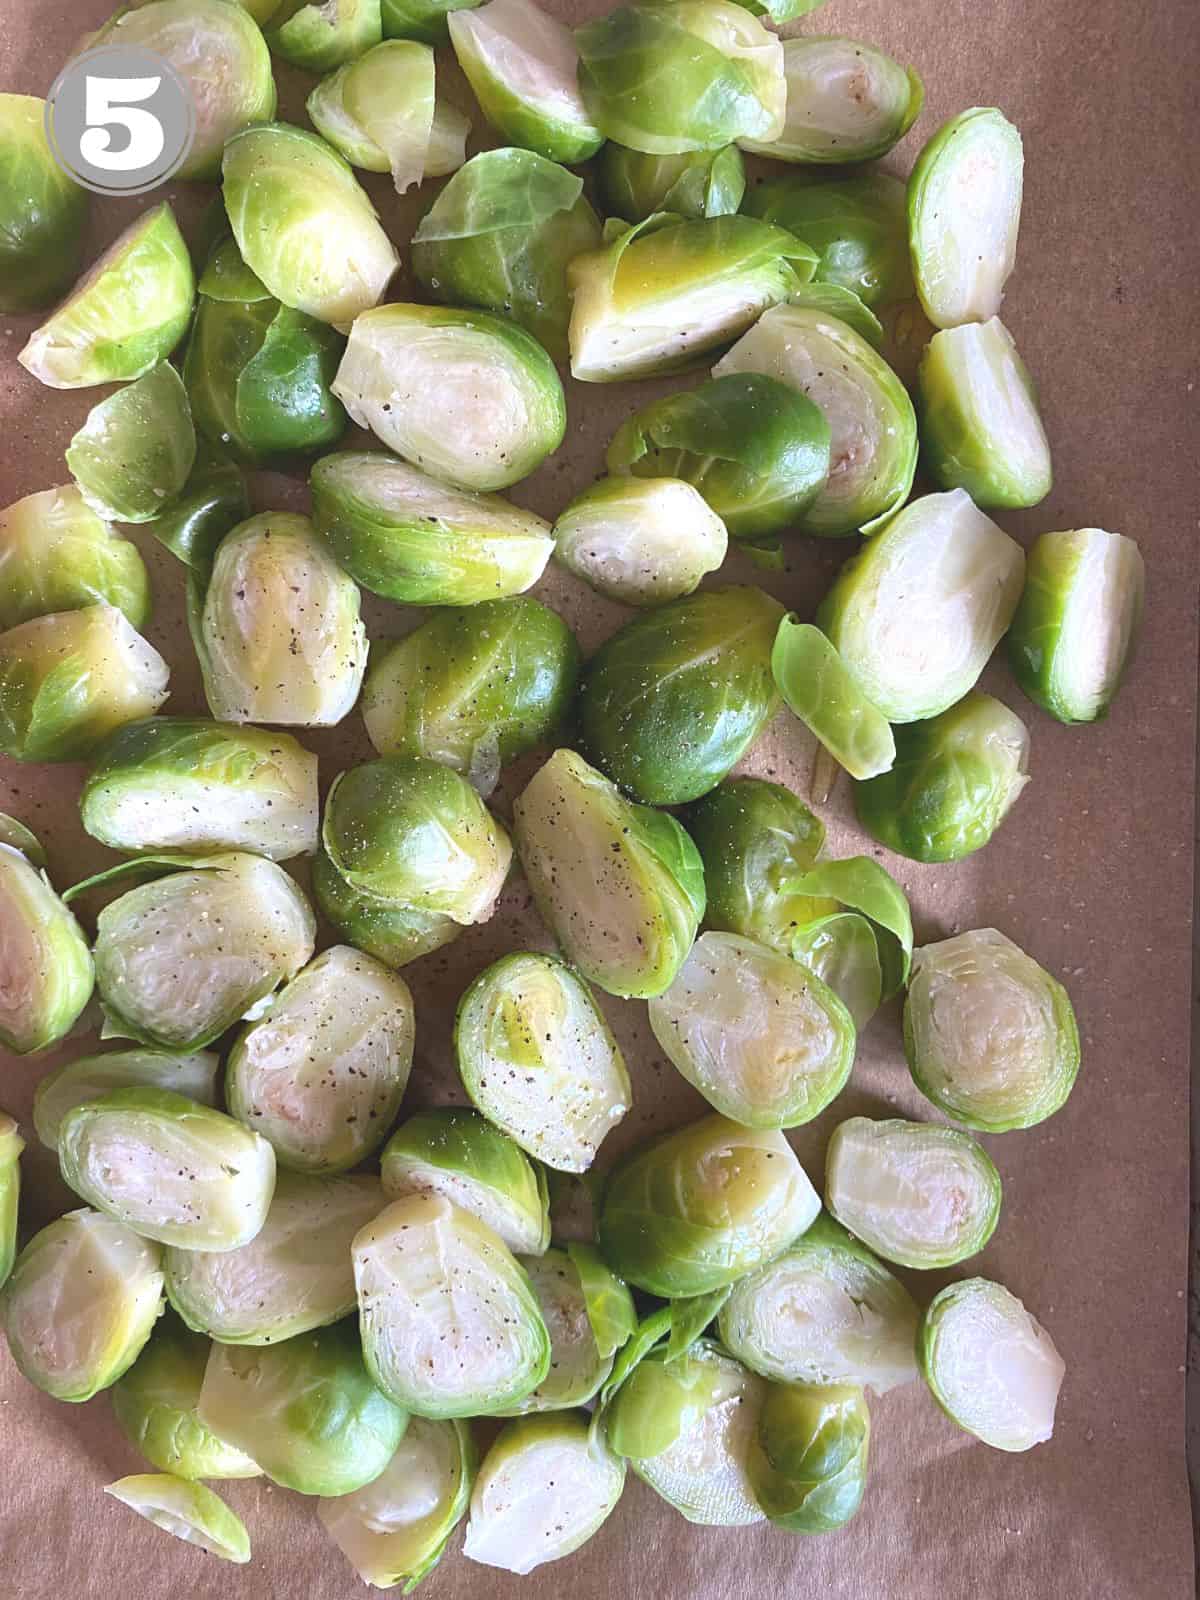 halved Brussels sprouts on parchment paper.